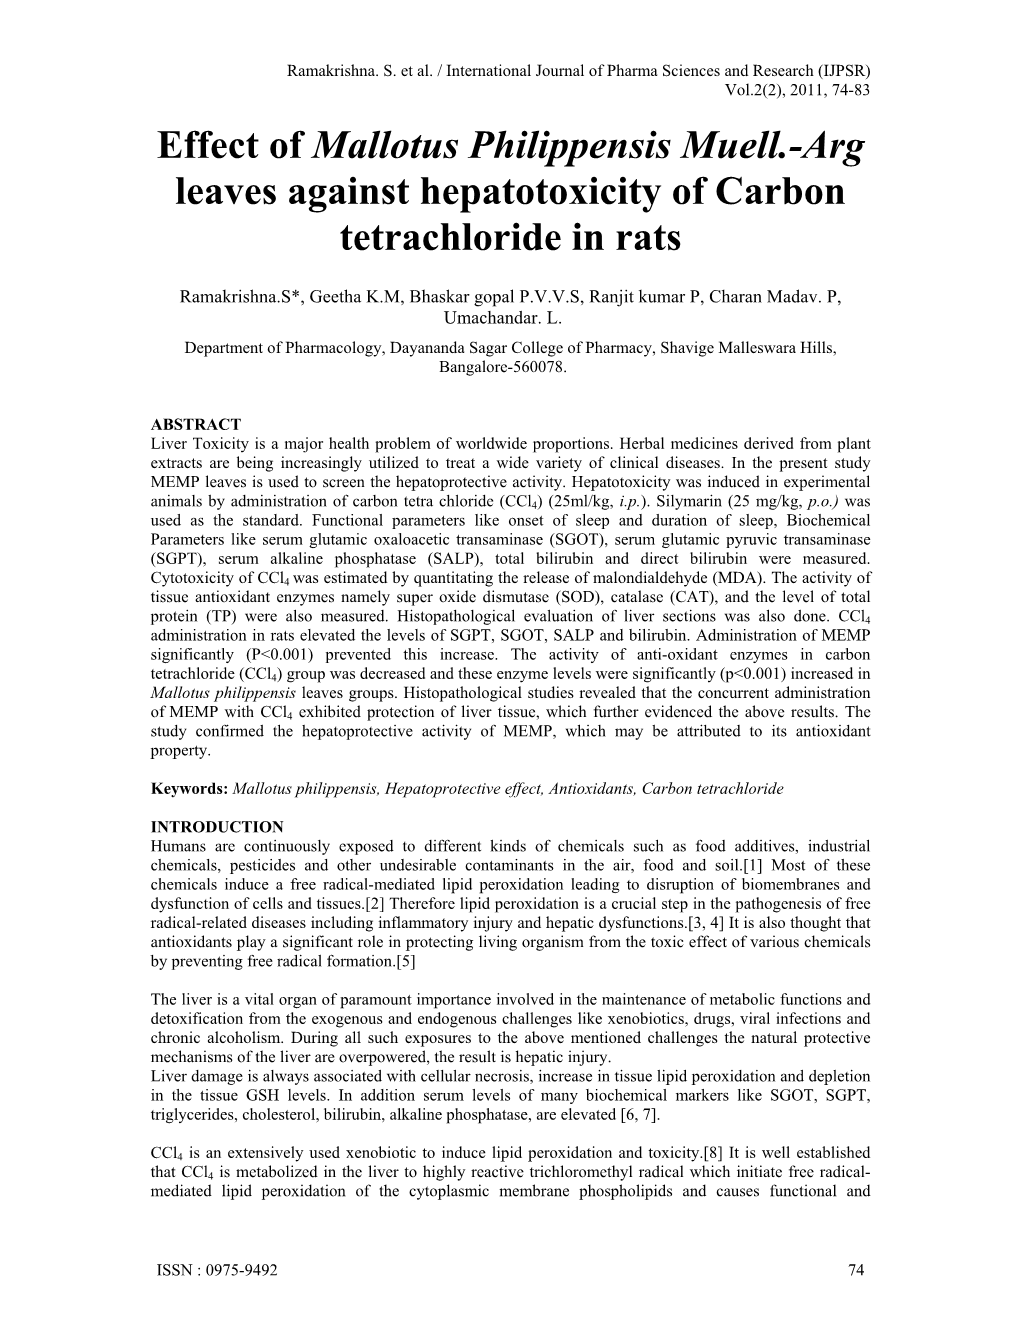 Effect of Mallotus Philippensis Muell.-Arg Leaves Against Hepatotoxicity of Carbon Tetrachloride in Rats